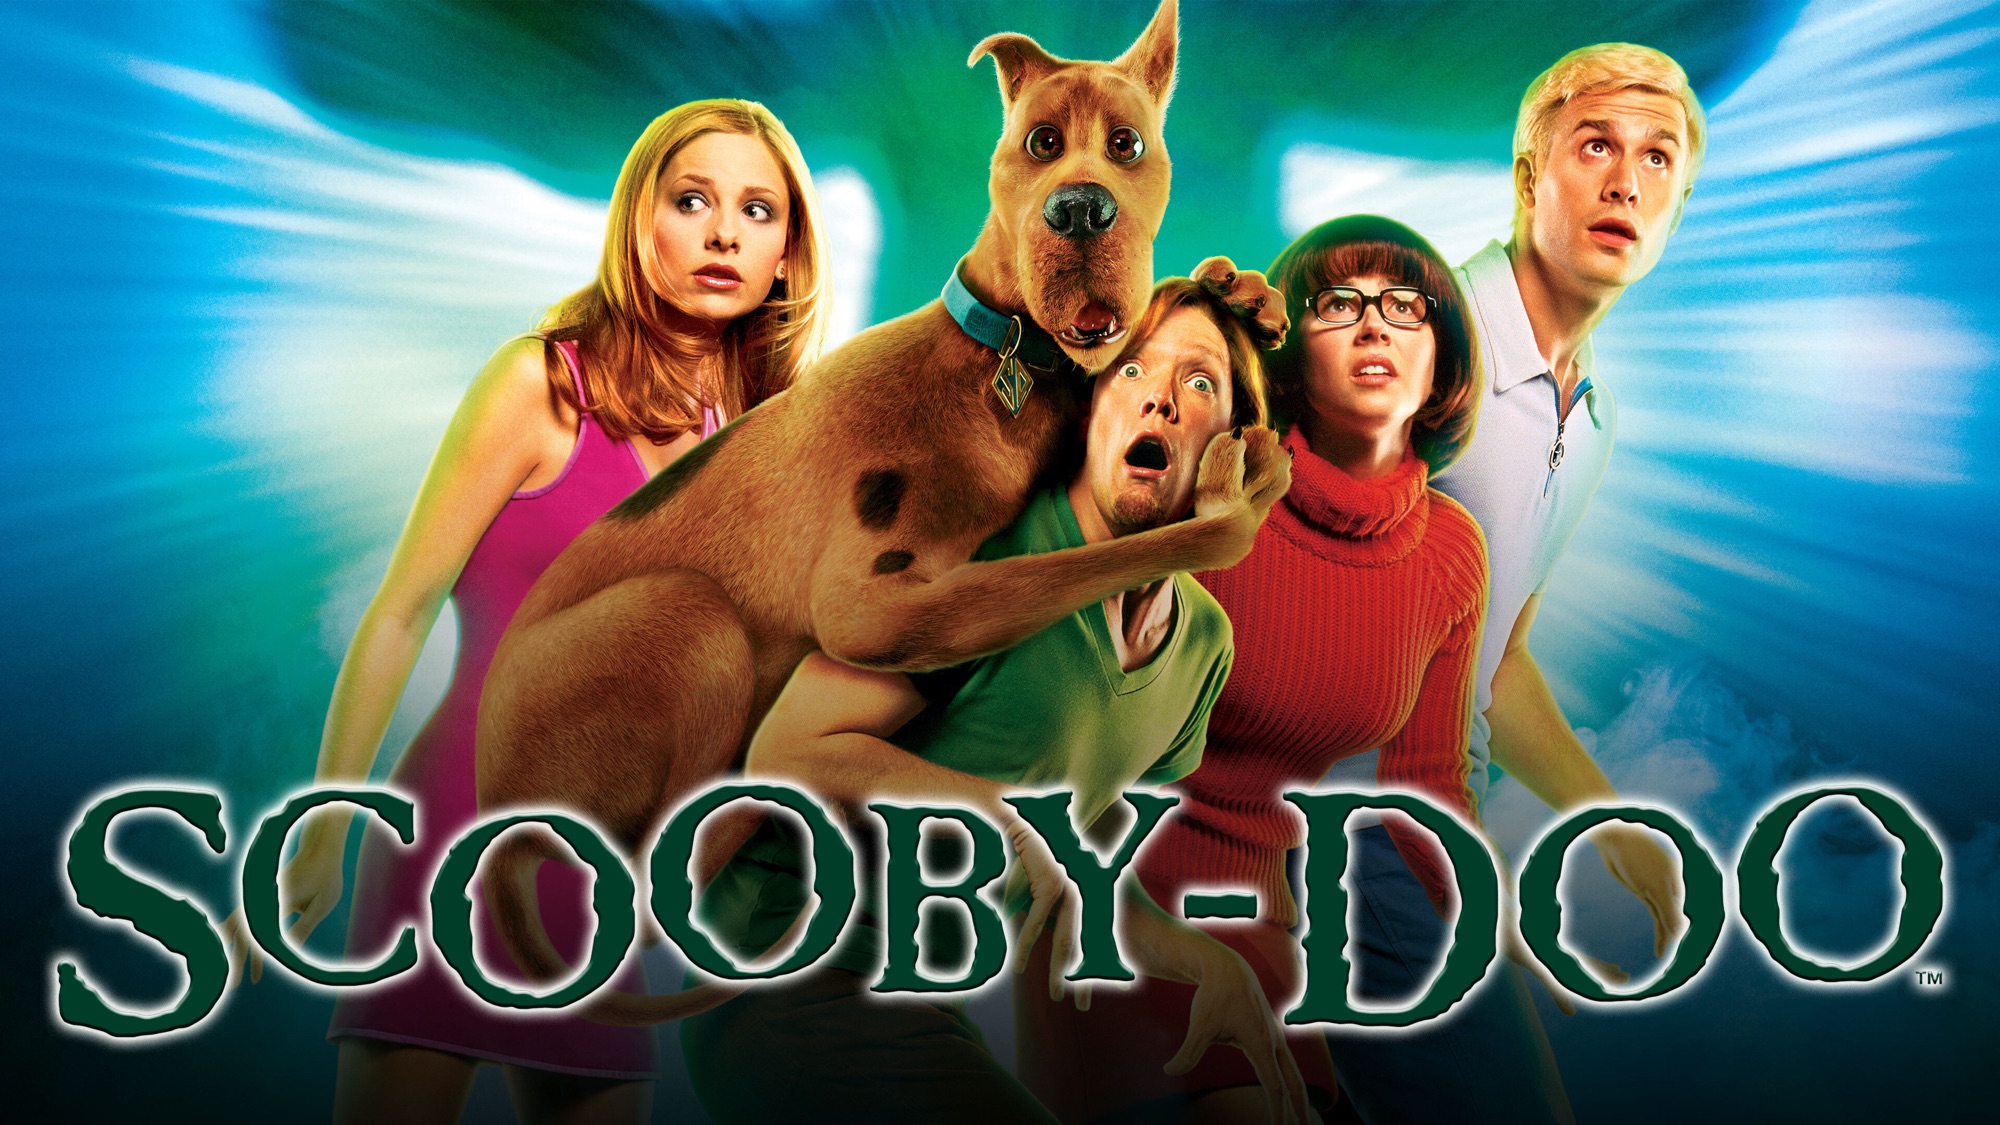 Movie Scooby-Doo HD Wallpaper | Background Image